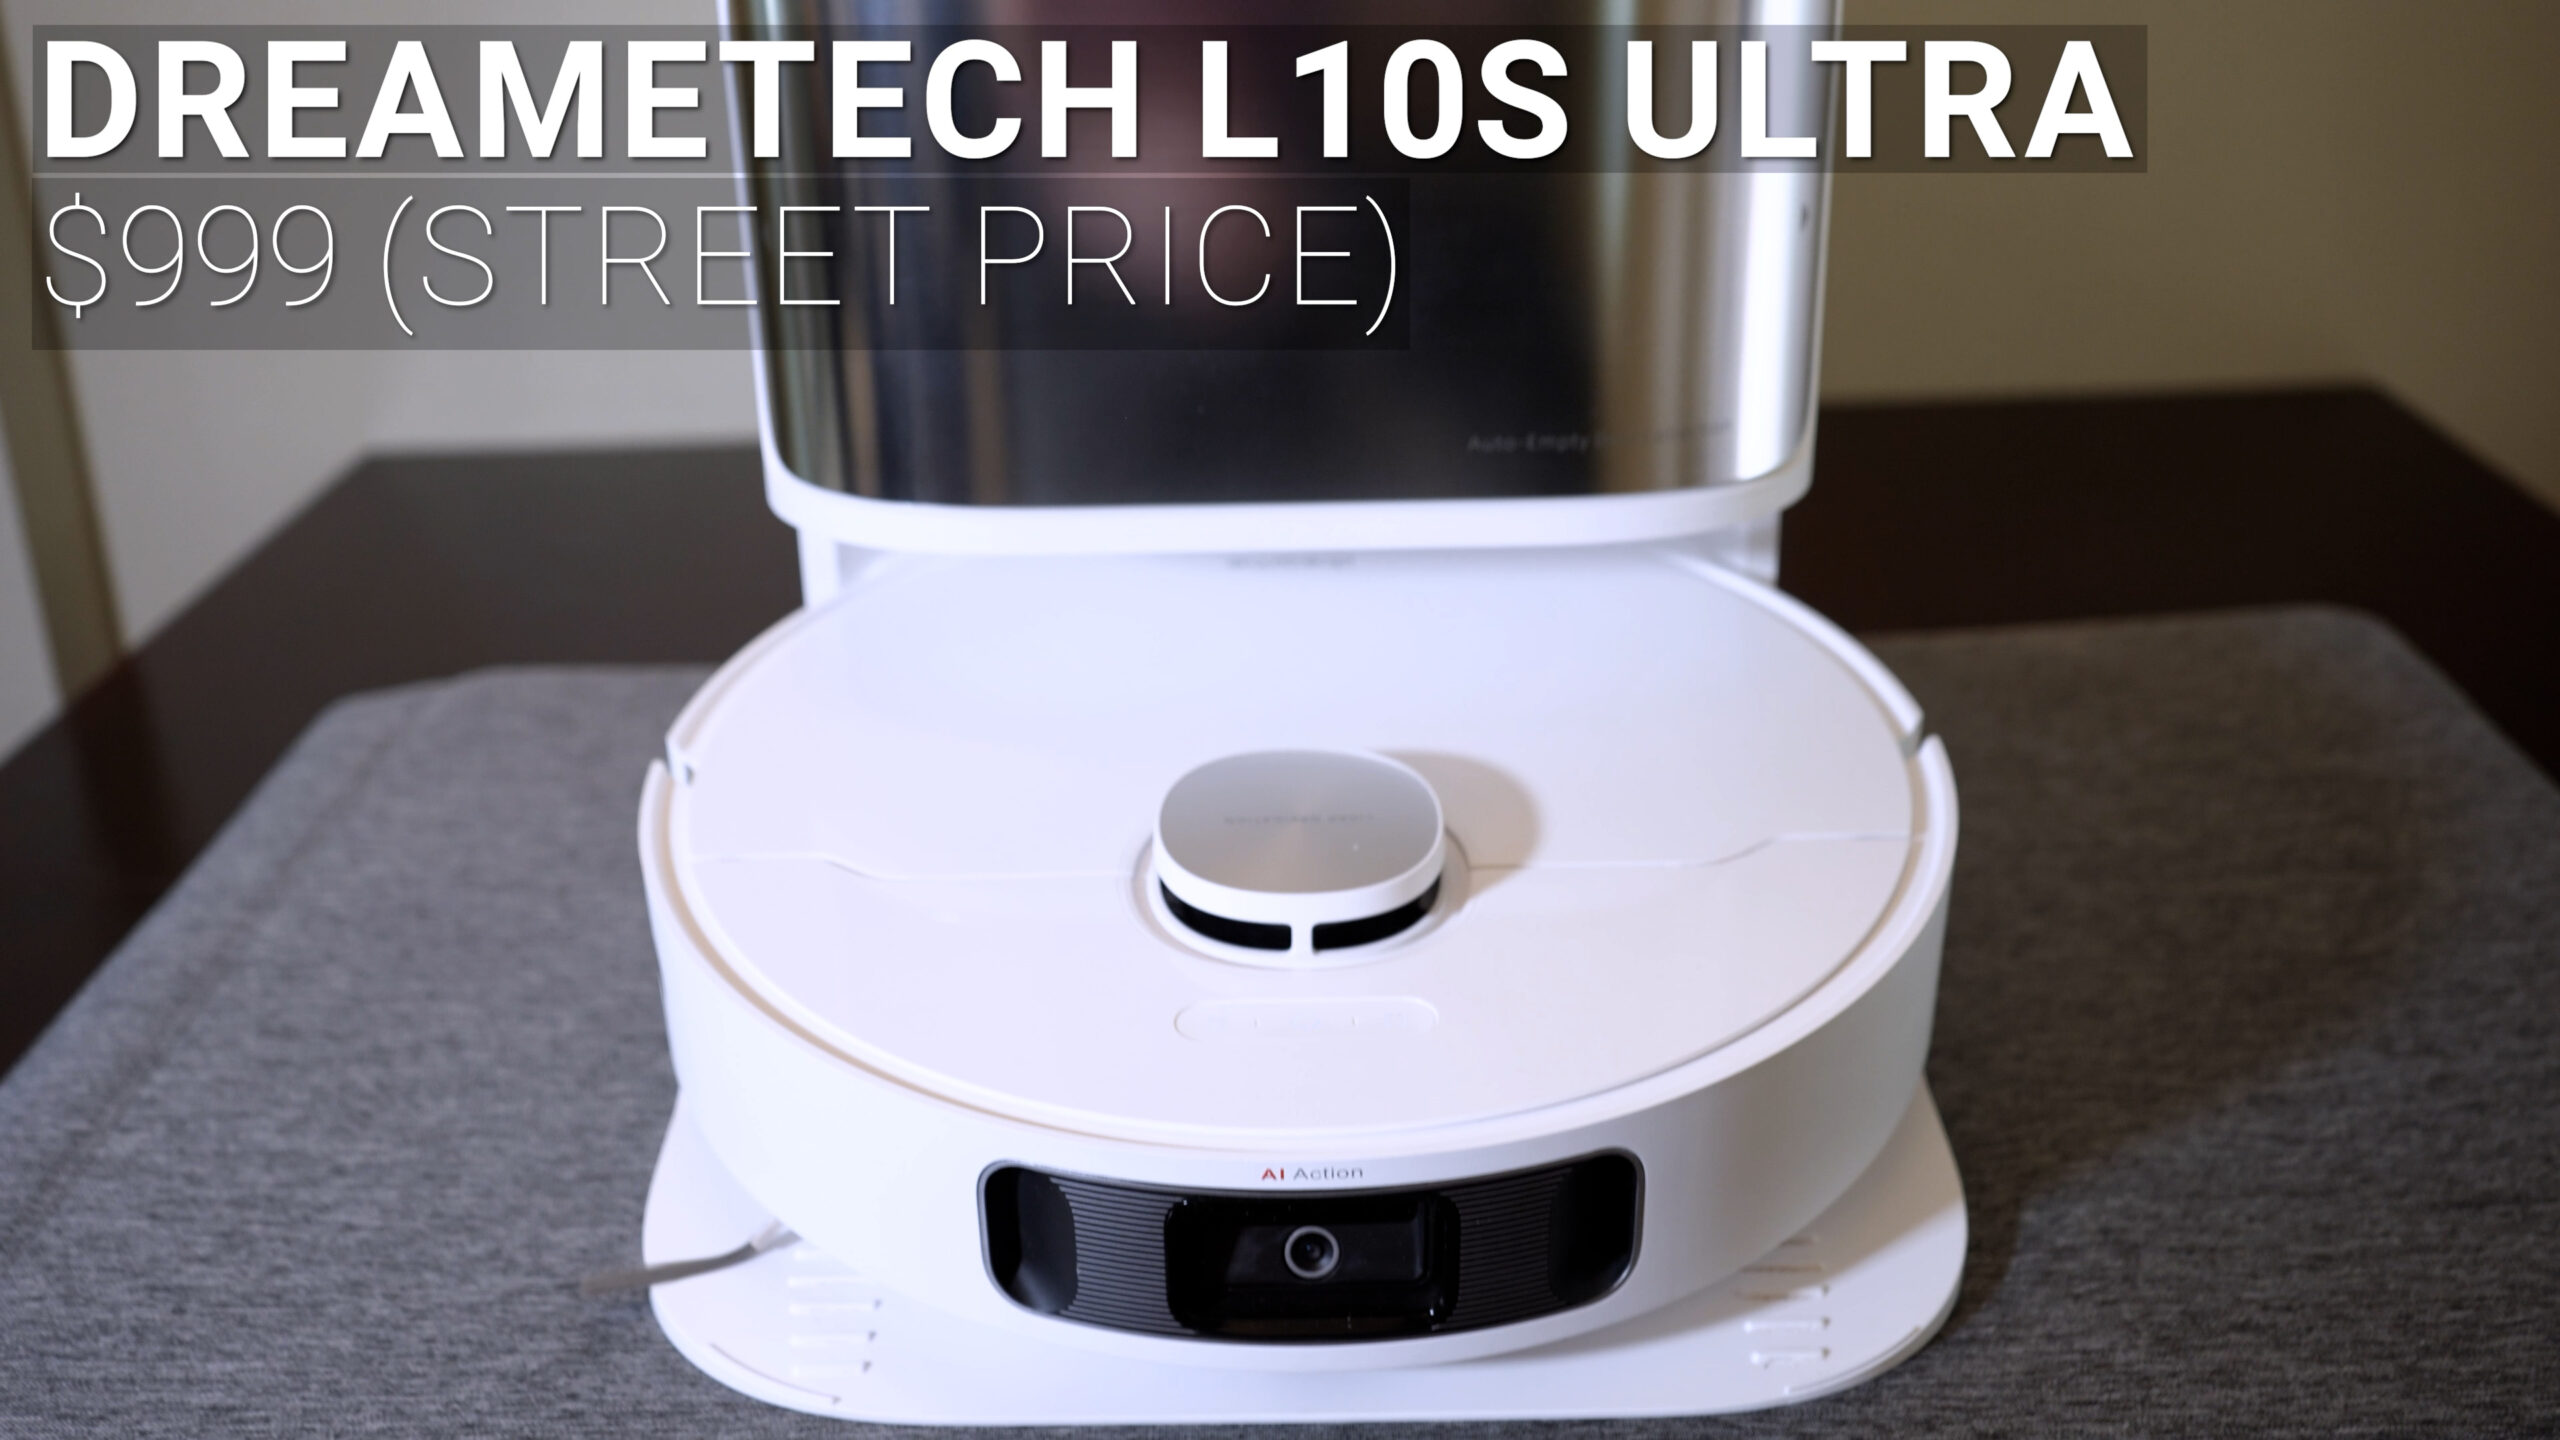 Dreametech DreameBot L10s Ultra robot vacuum and mop review - the